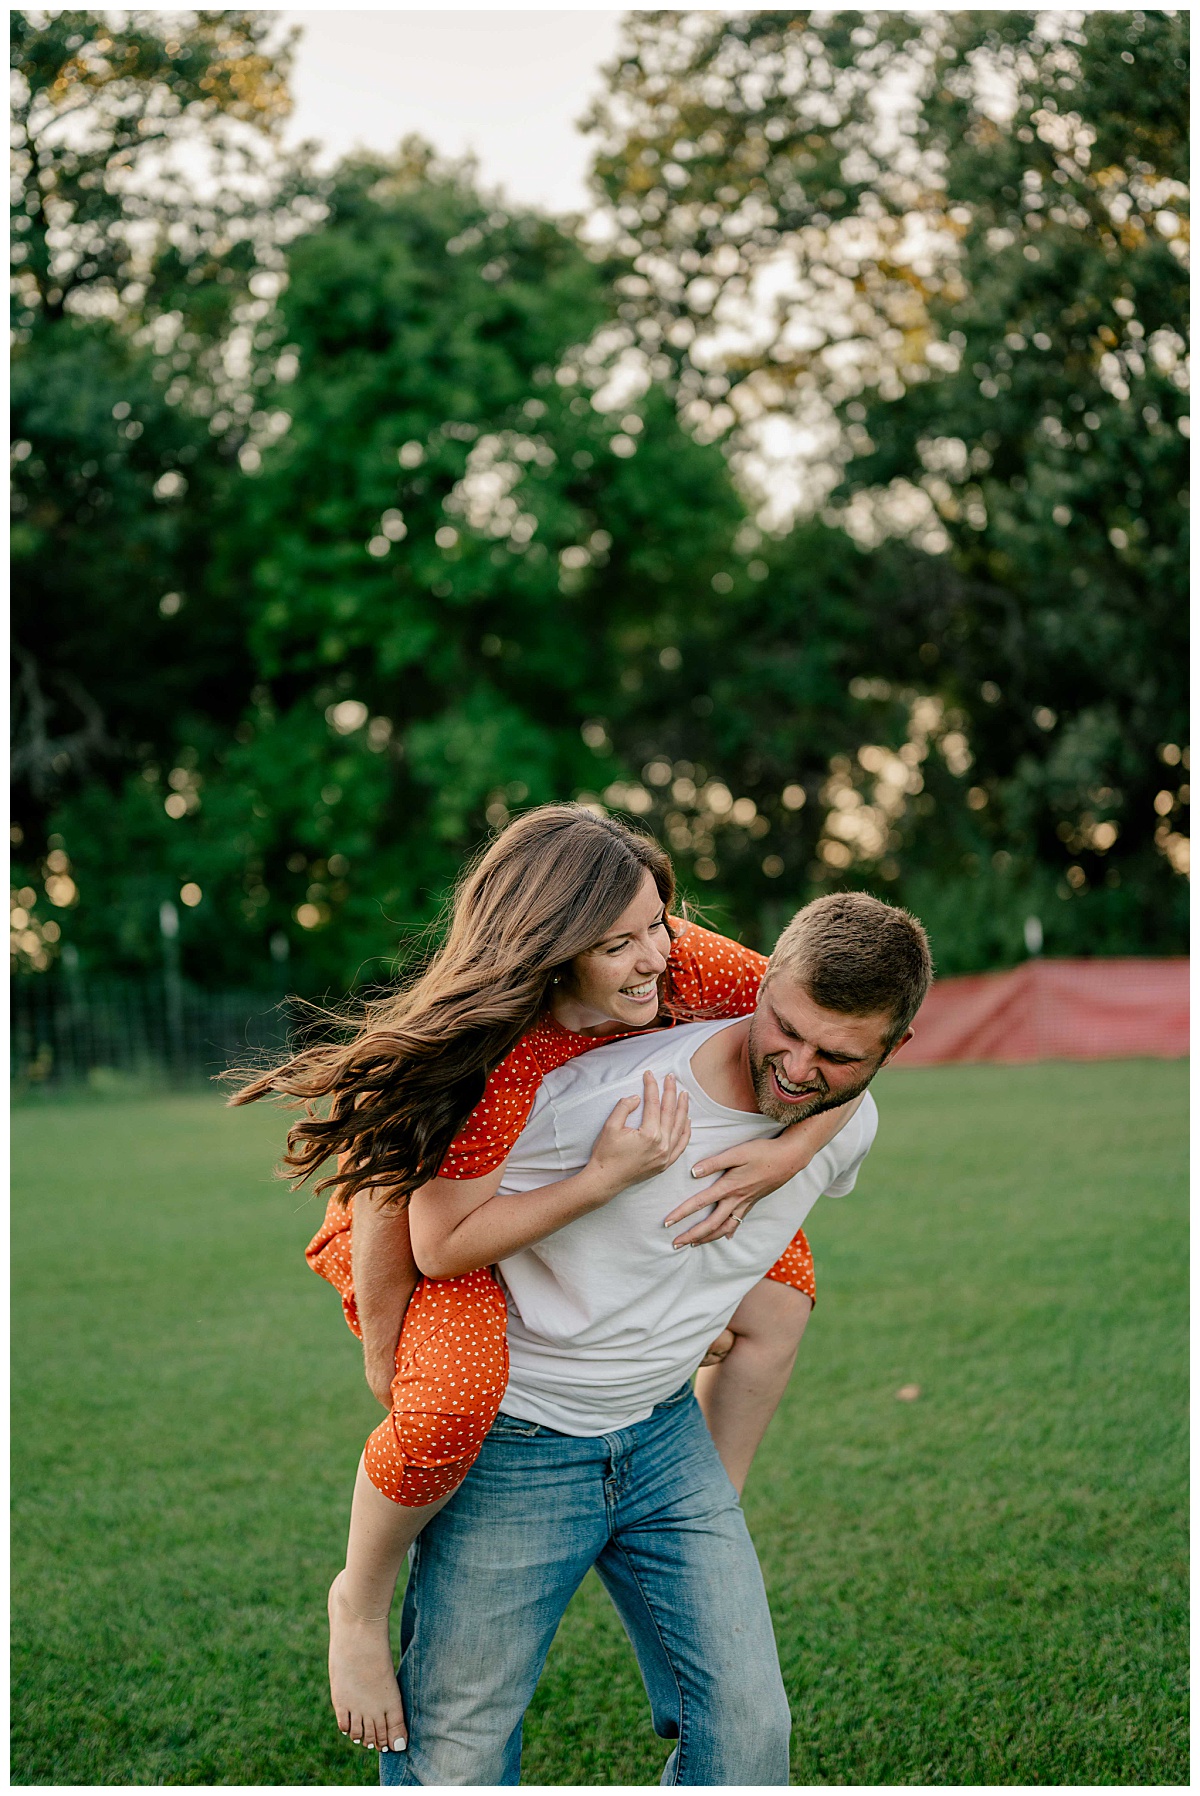  man and woman show the magic of engagement sessions as he carries her on his back while they laugh